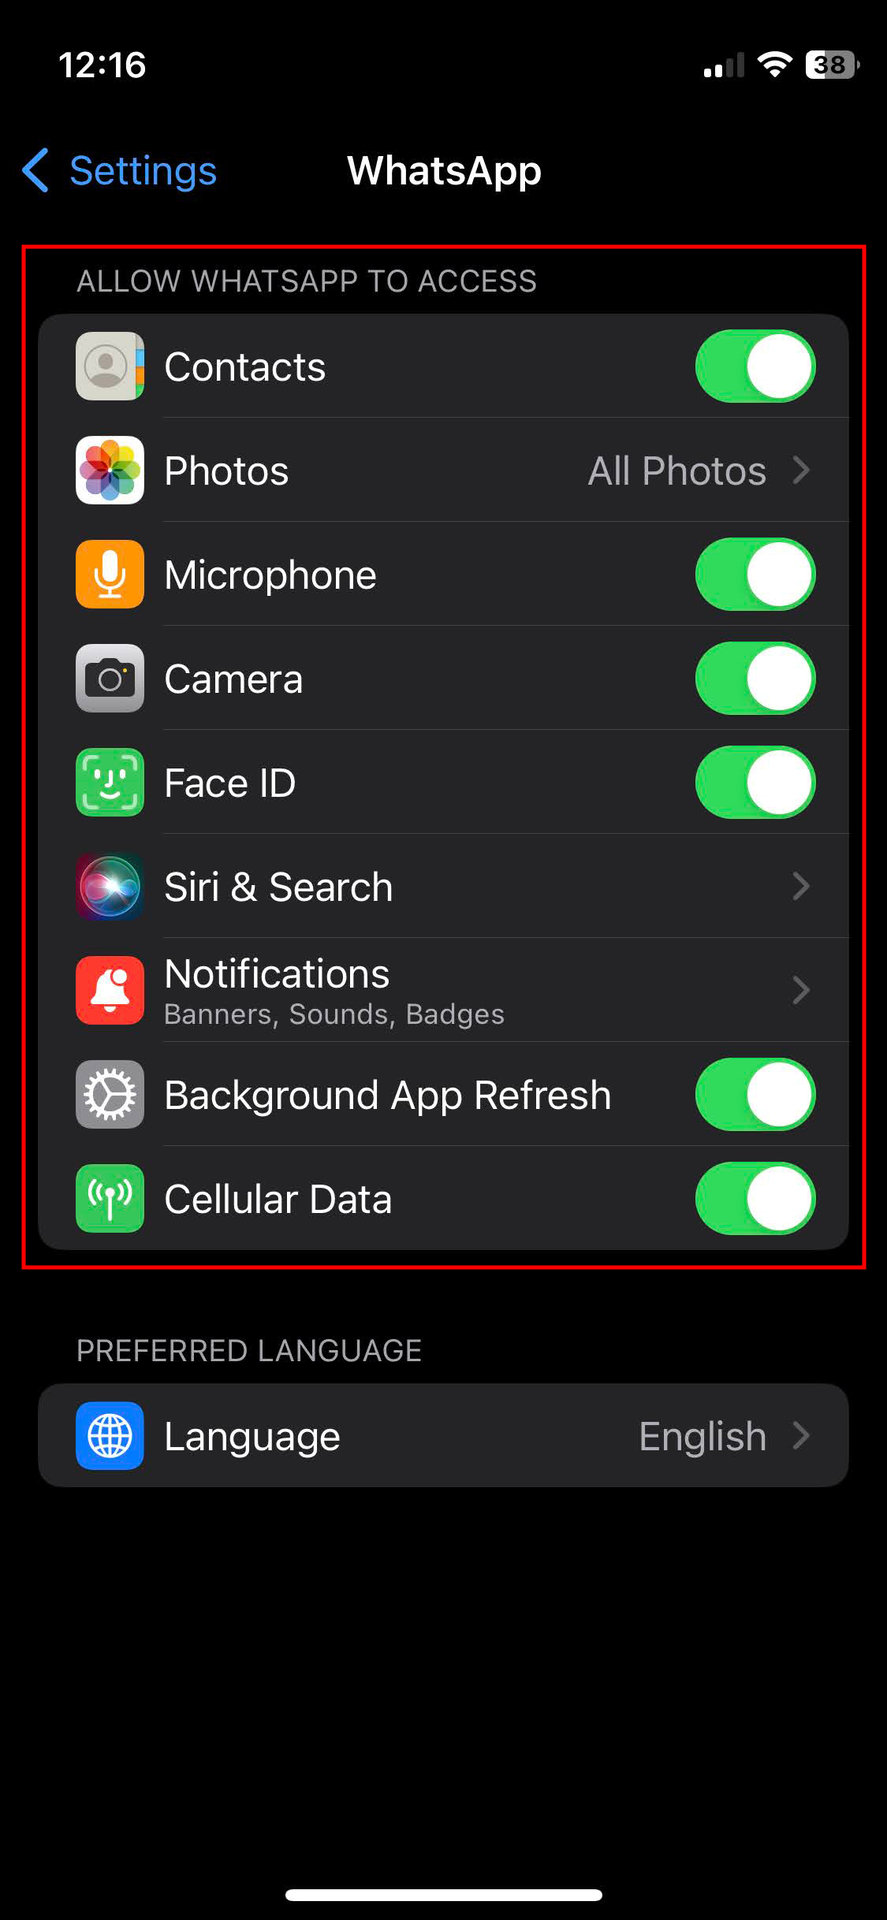 How to allow WhatsApp permissions on iPhone 2